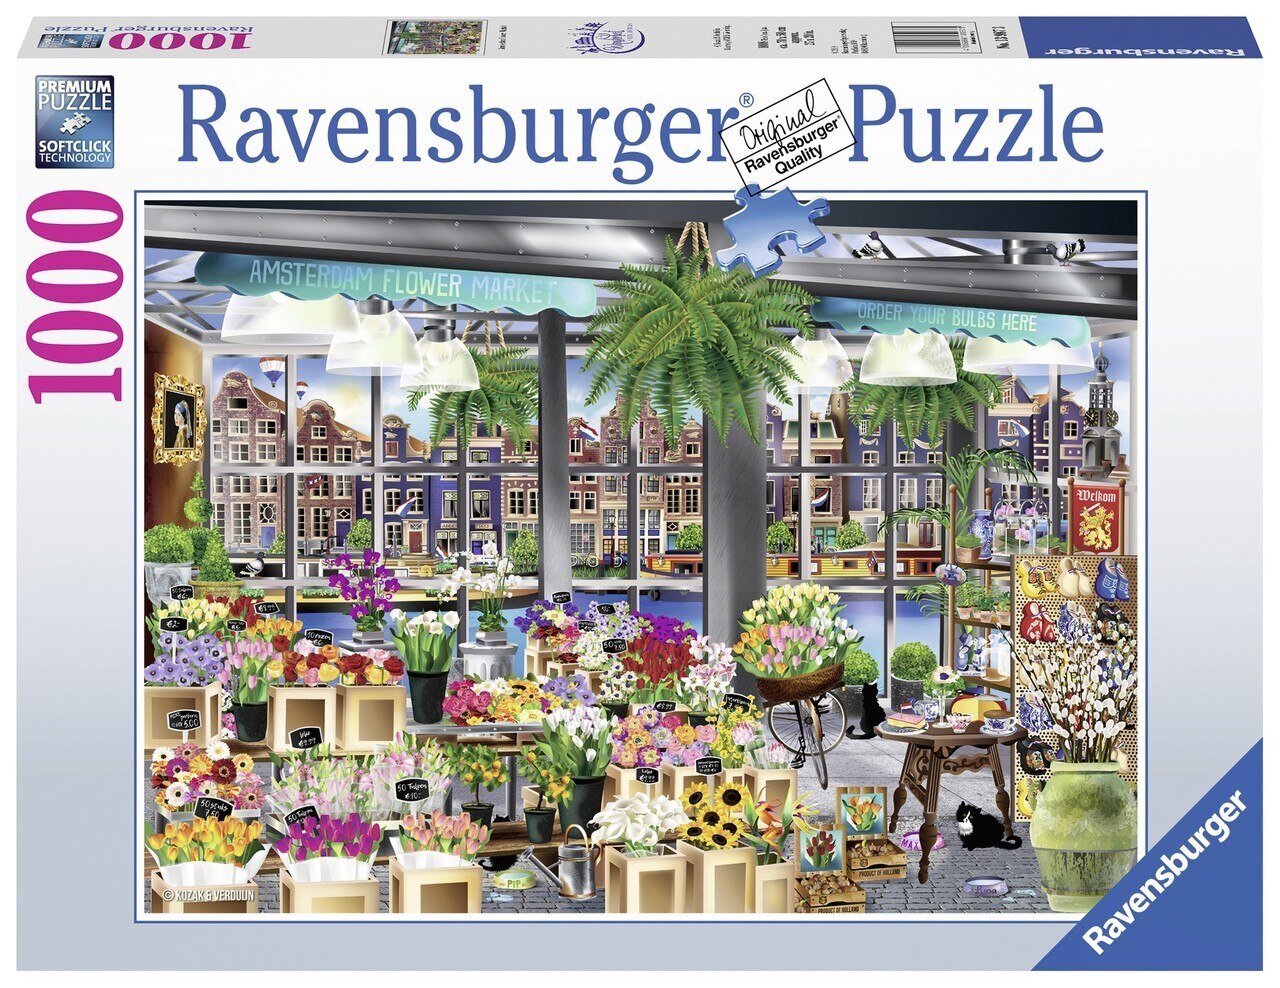 Ravensburger Wanderlust Amsterdam Flower Market Puzzle Buy Adult Jigsaw Puzzles With Afterpay